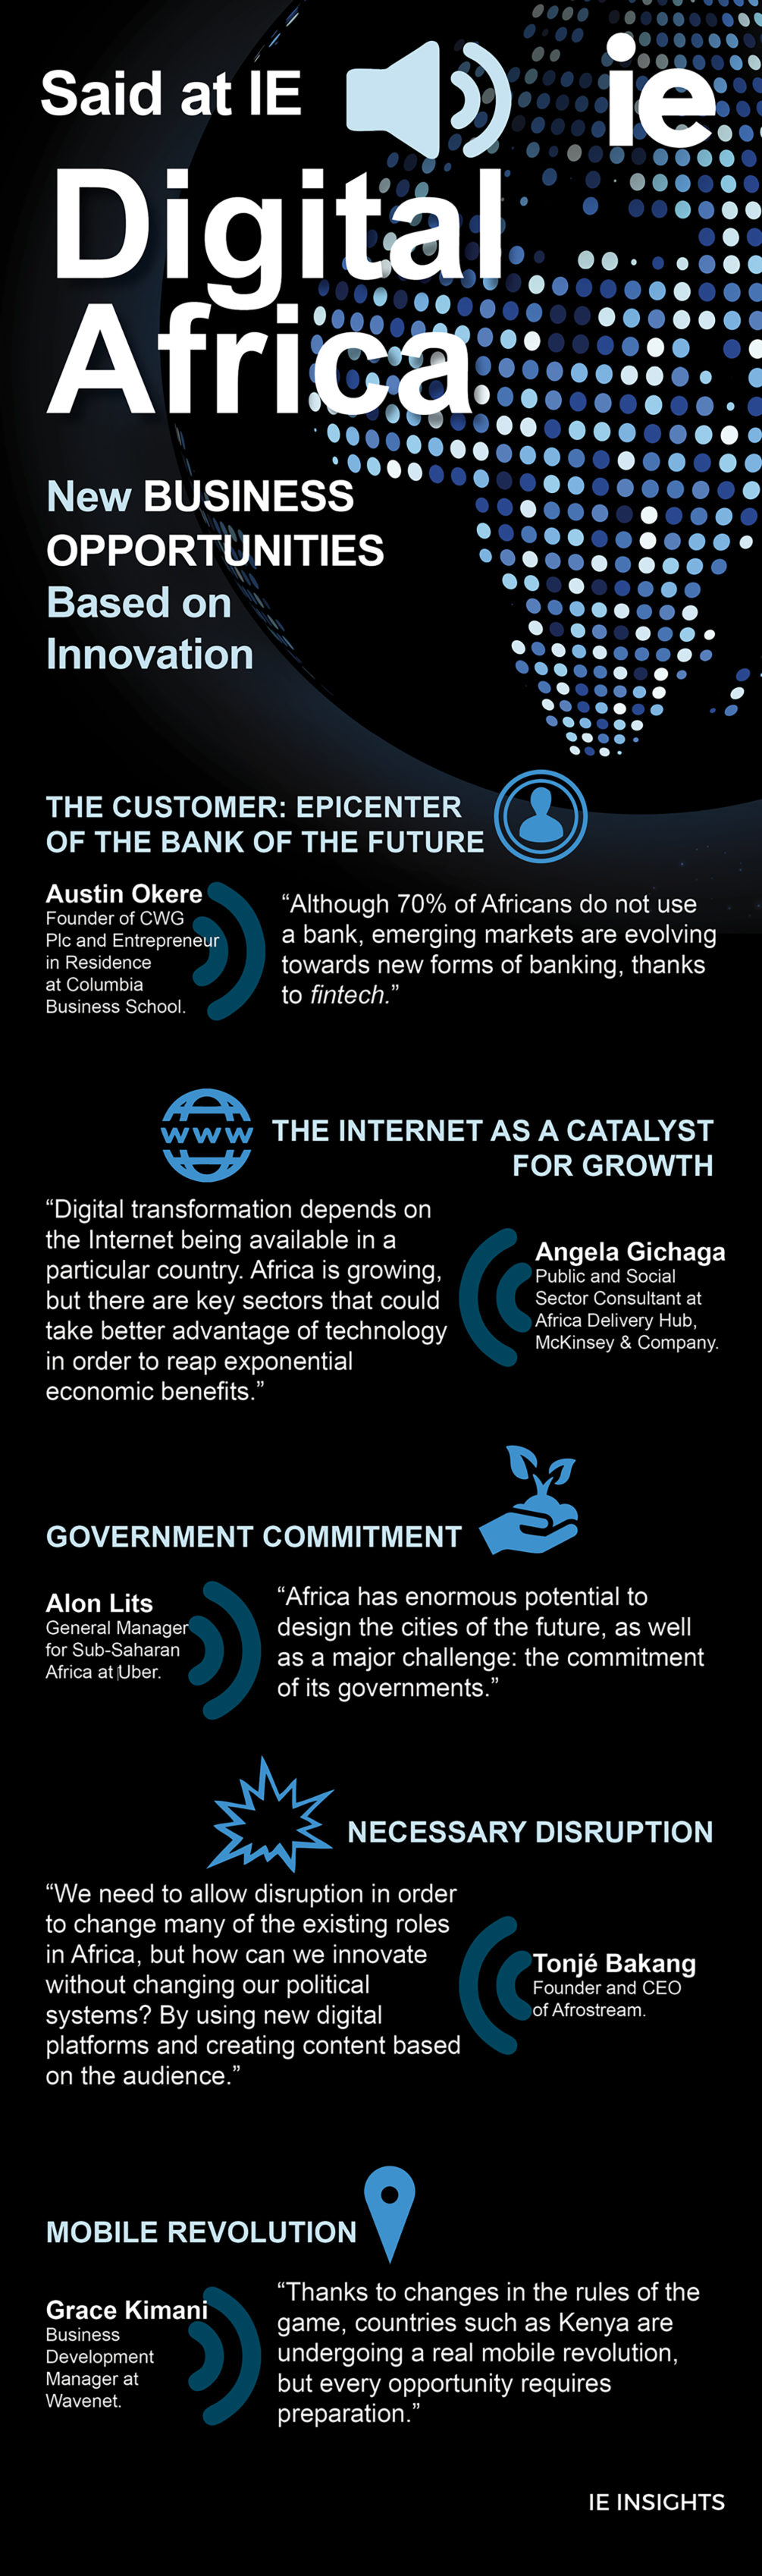 Digital Africa: New Business Opportunities Based on Innovation